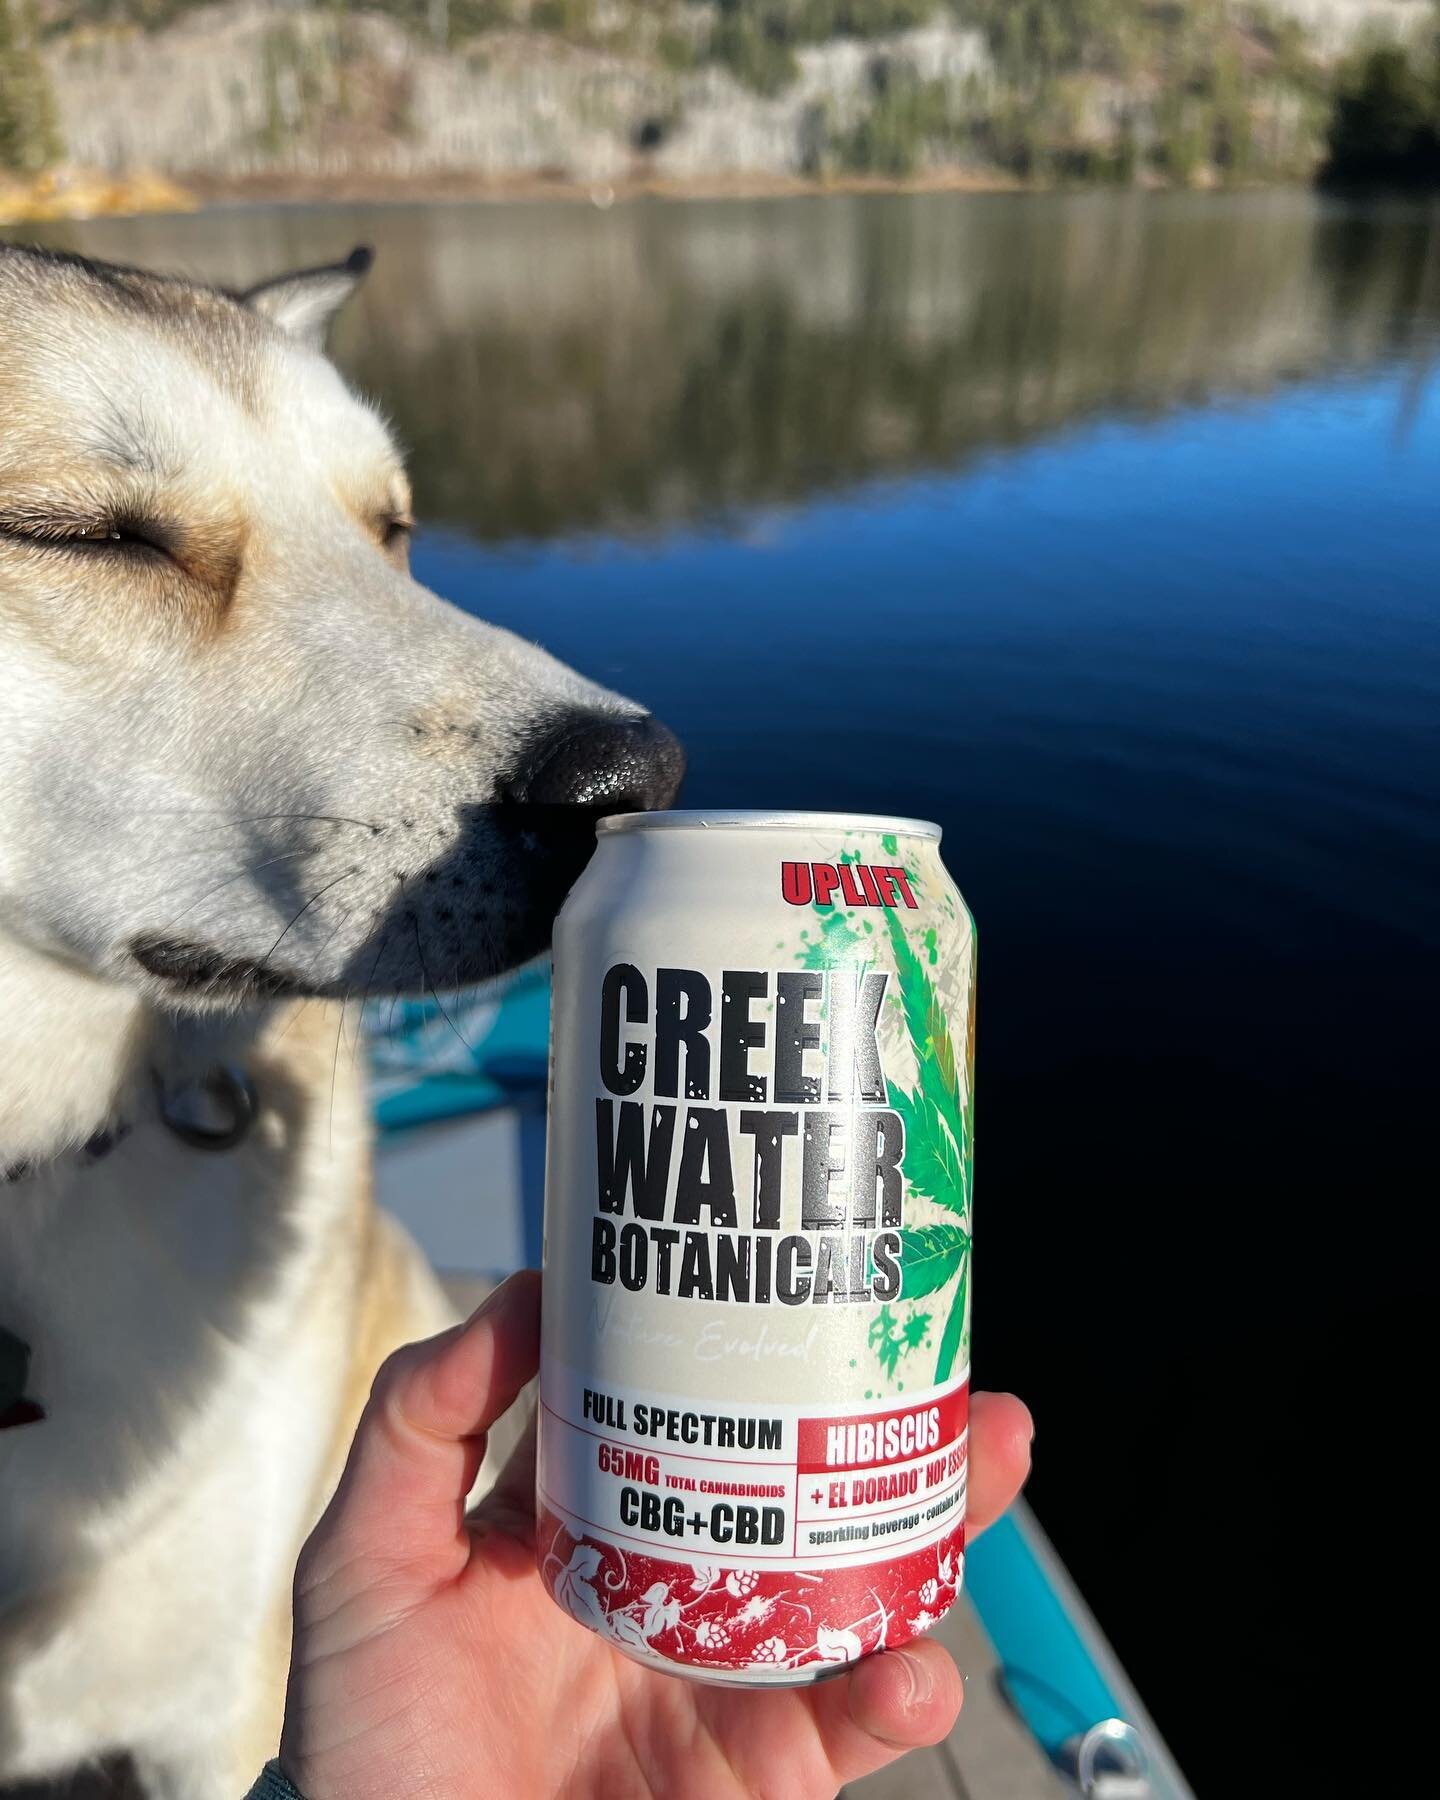 This time of year we really start getting real antsy for those dog days of summer 🌞 🐾 

Who else can&rsquo;t wait to get out into the wild &amp; get their toes in the water?! 💦 

📸 @herewegrow.xo and her pup Kiako loving our CBG Uplift ❤️